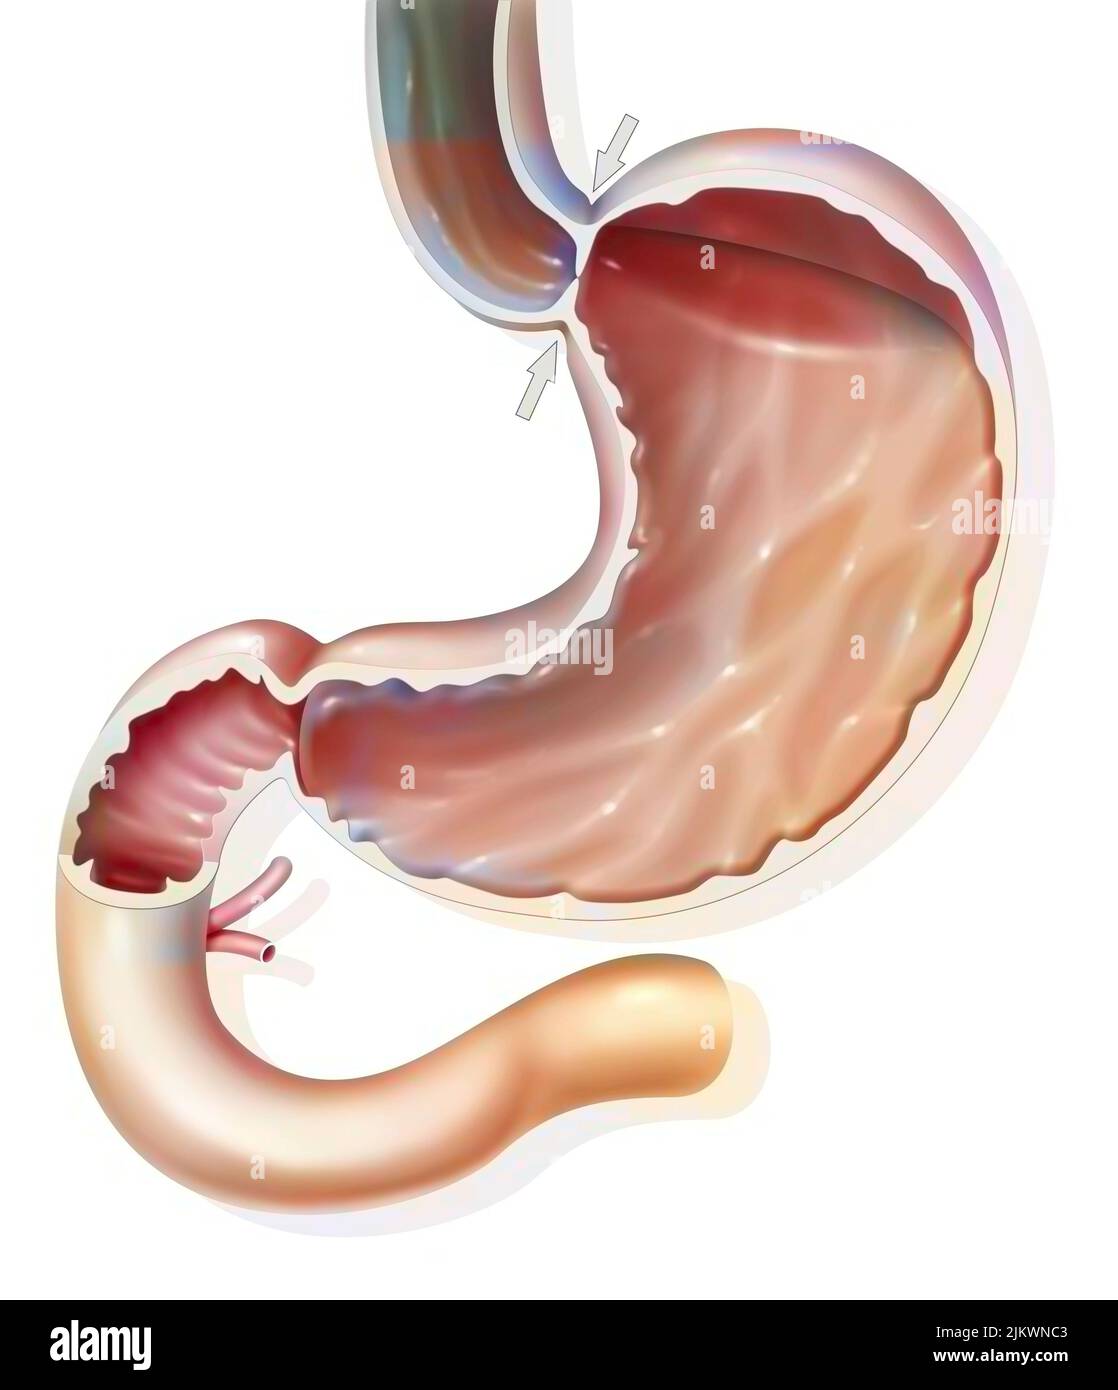 Stomach: normal, hermetic gastroesophageal sphincter, preventing gastroesophageal reflux. Stock Photo